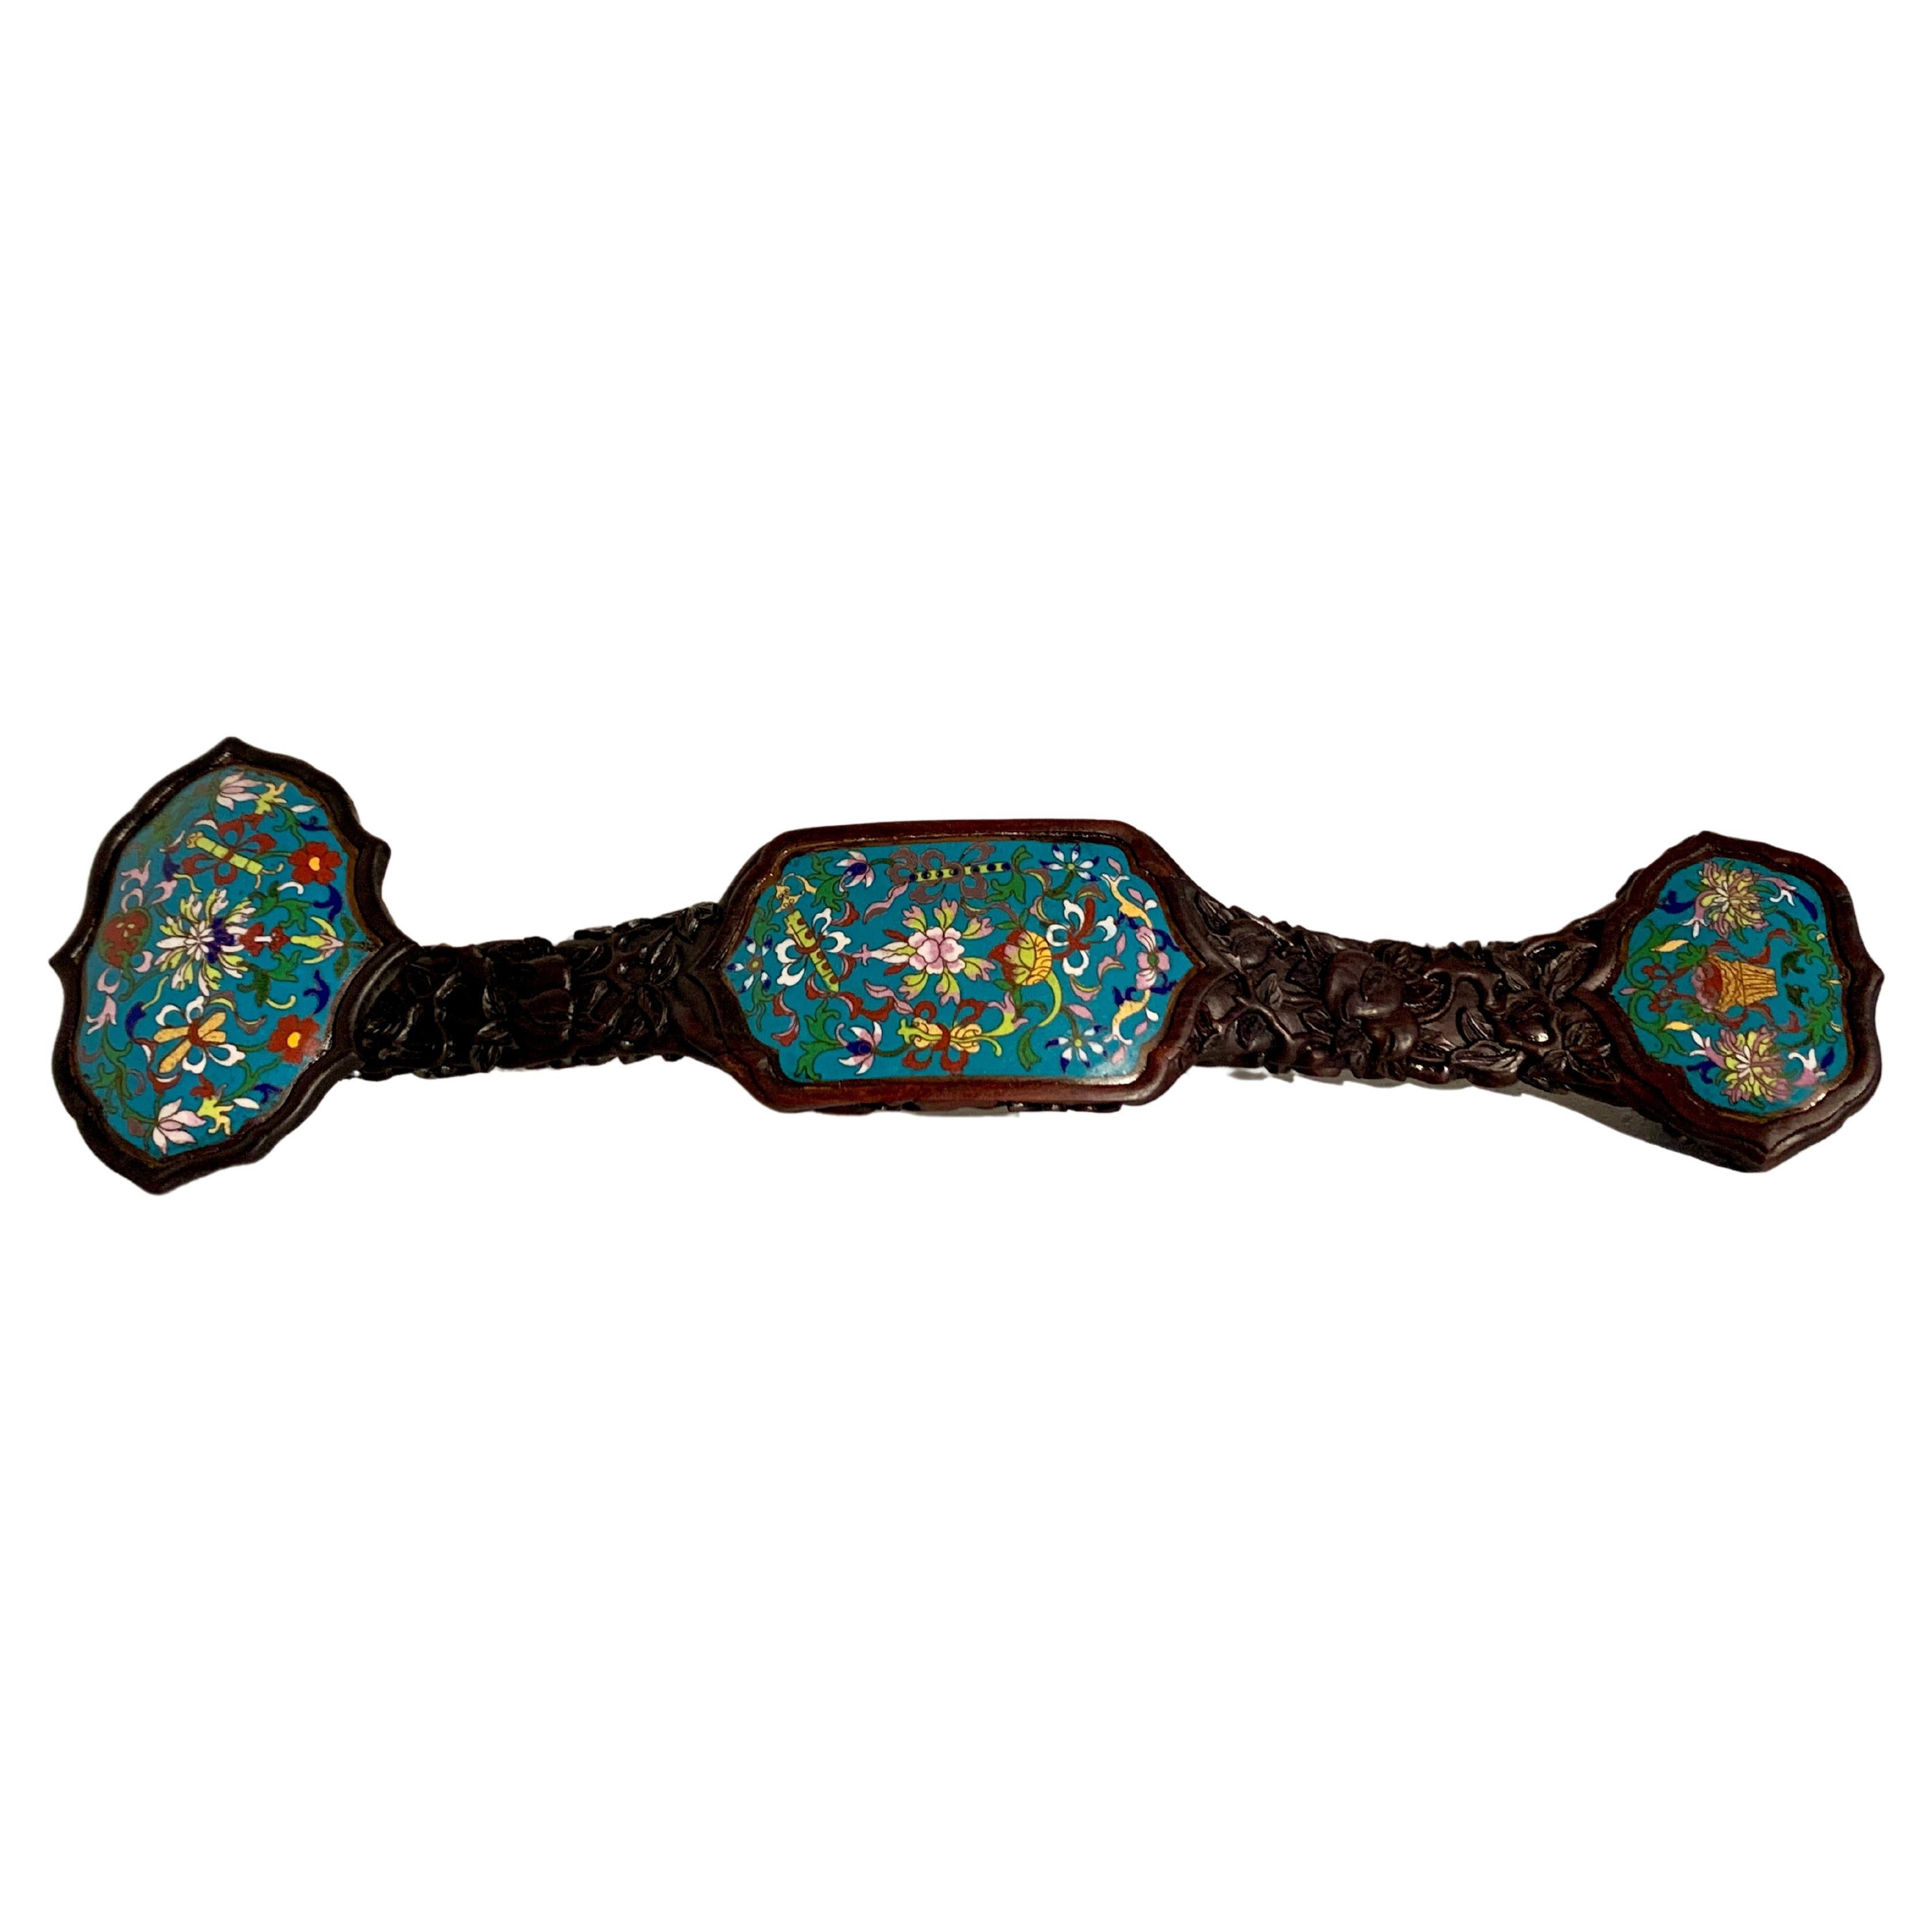 Large Chinese Carved Hardwood and Cloisonne Ruyi Scepter, circa 1920, China